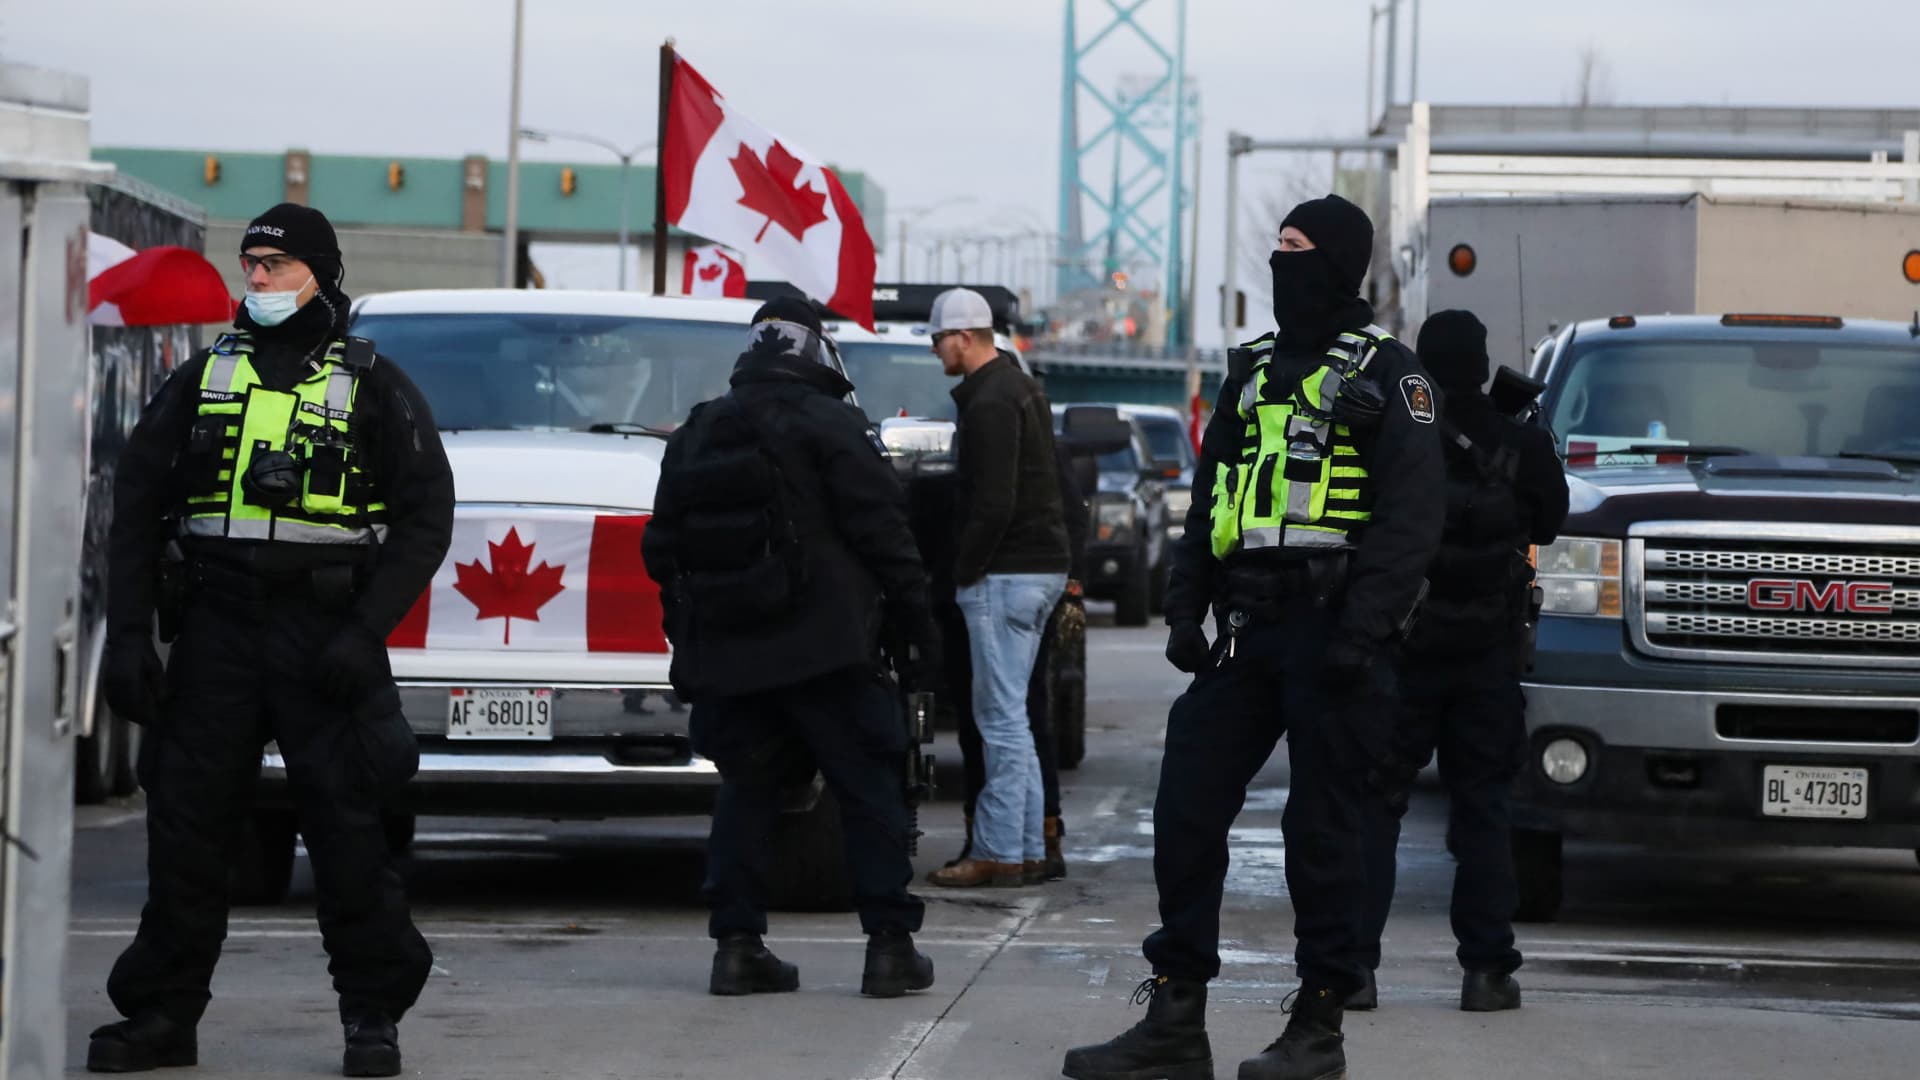 Police officers stand guard on a street as truckers and supporters continue blocking access to the Ambassador Bridge, which connects Detroit and Windsor, in protest against coronavirus disease (COVID-19) vaccine mandates, in Windsor, Ontario, Canada February 12, 2022.